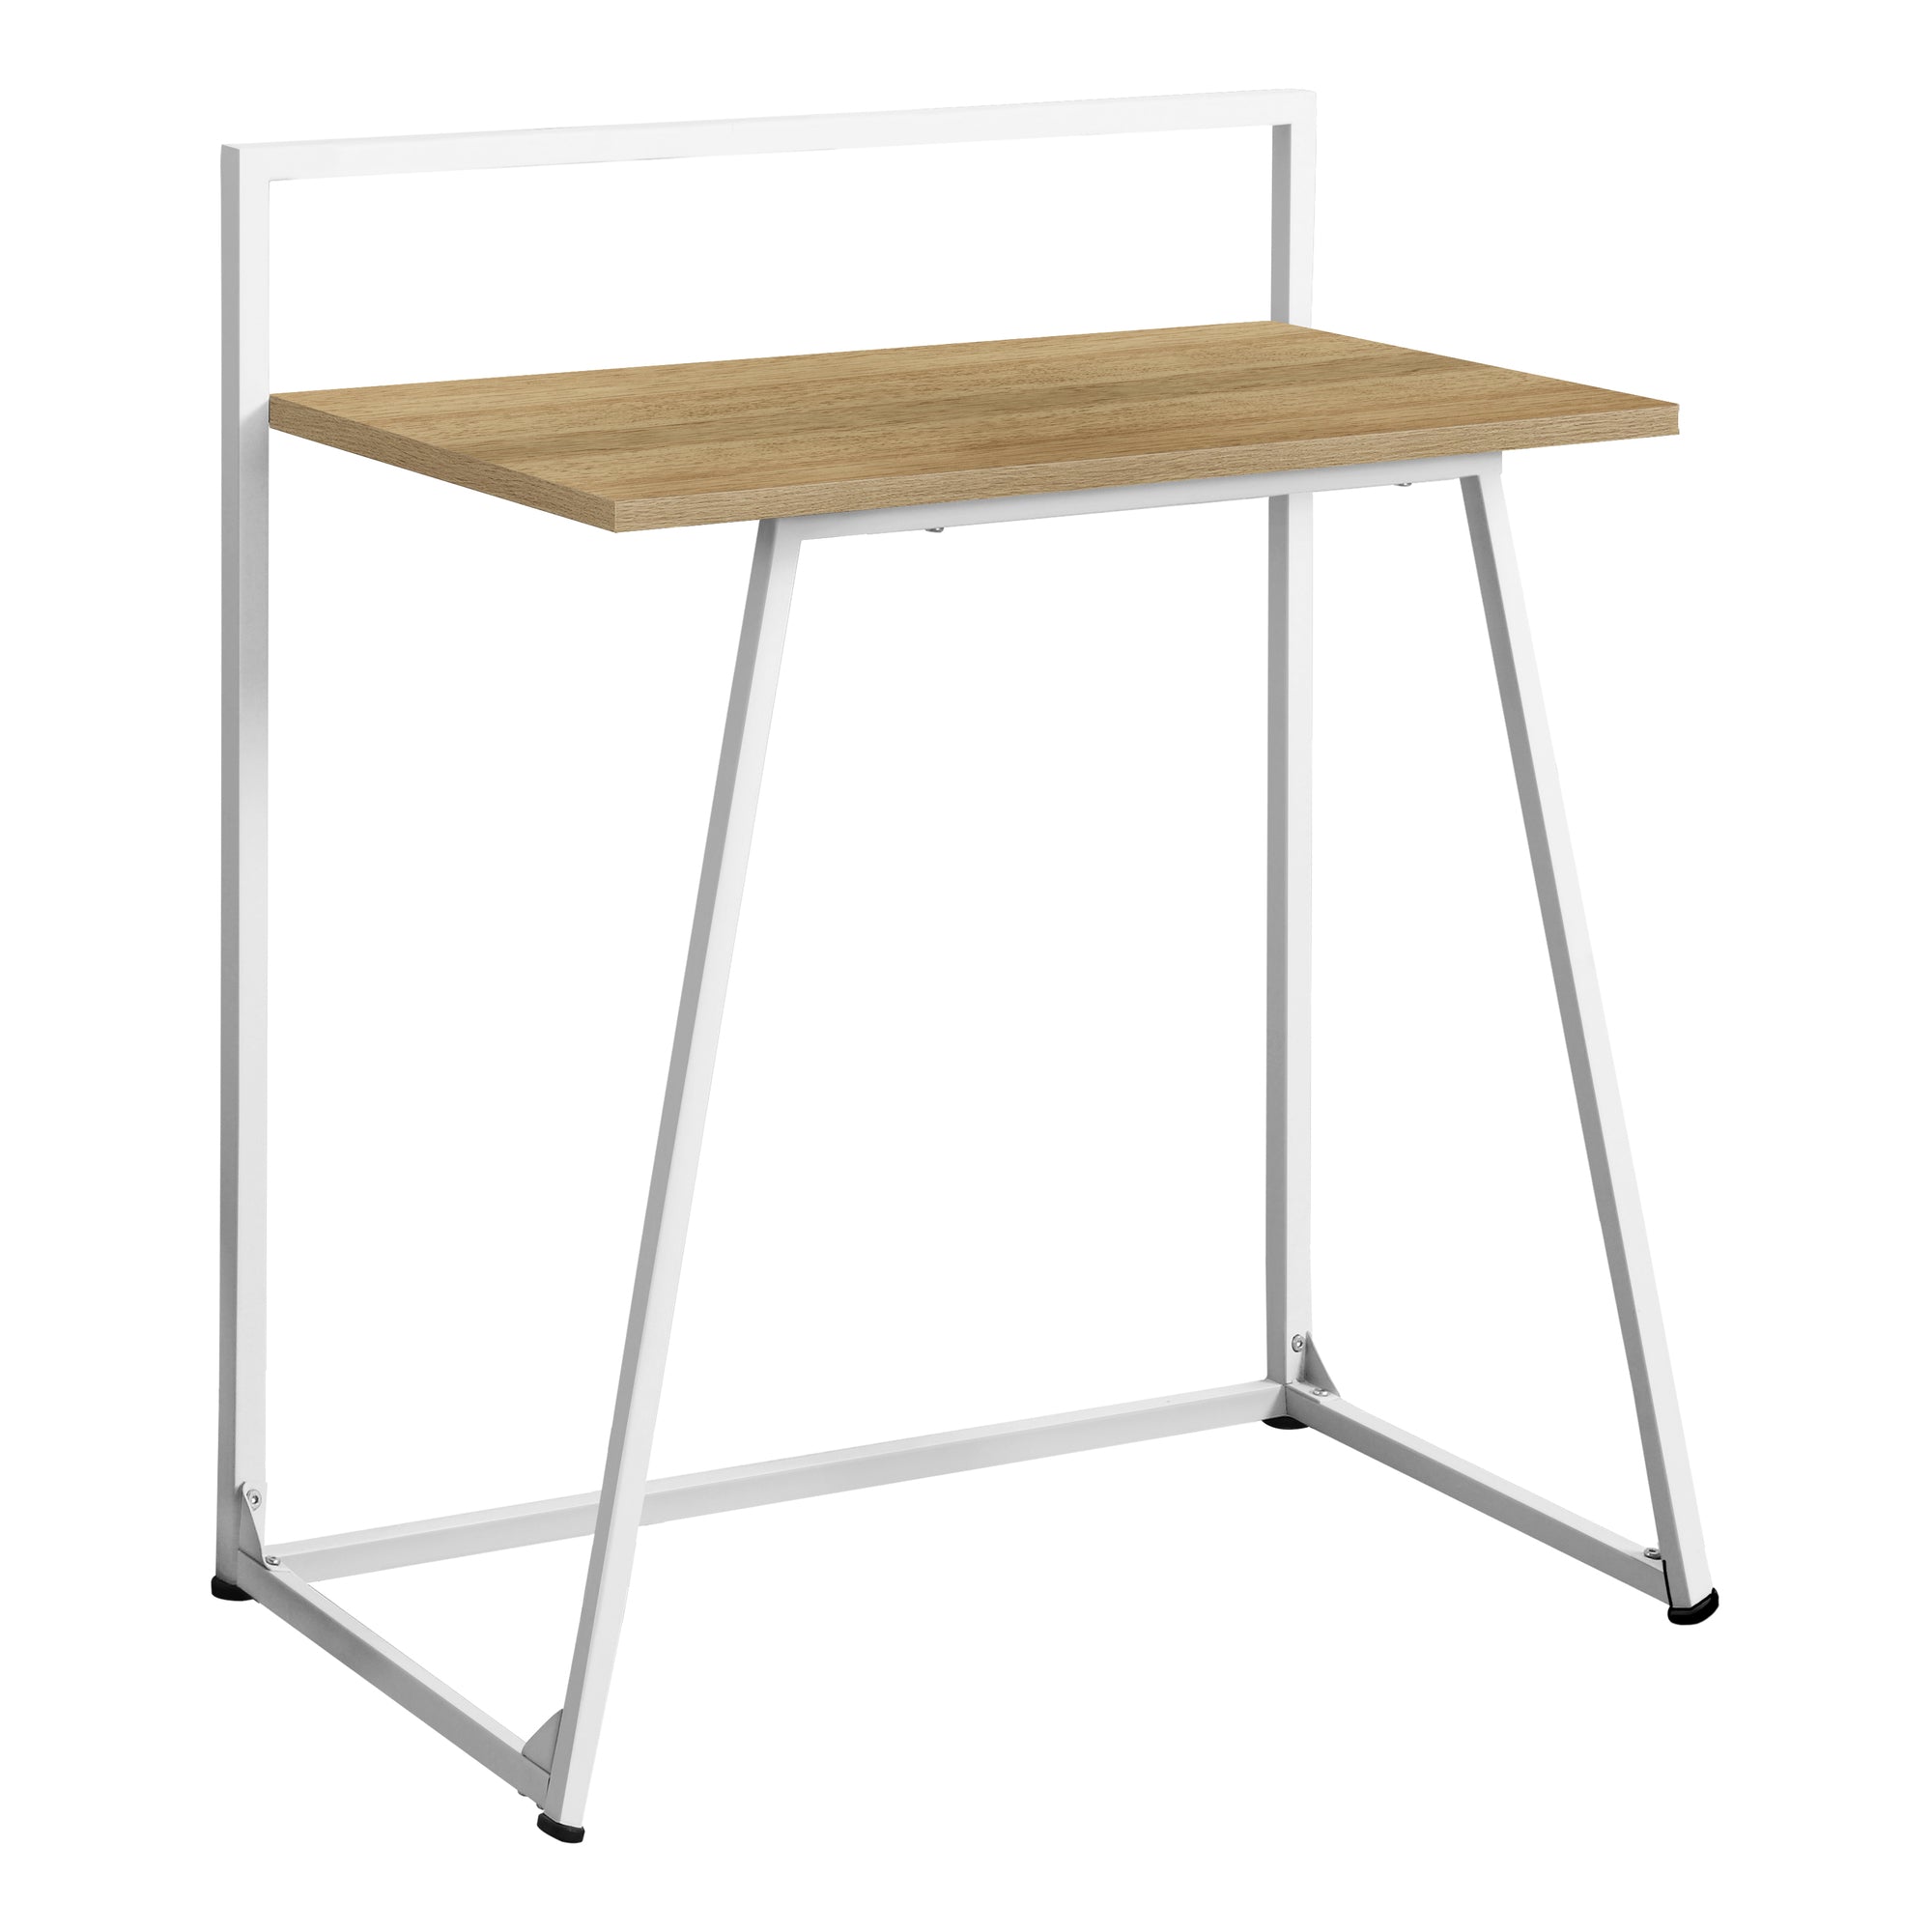 MN-127119    Computer Desk, Home Office, Laptop, 30"L, Metal, Laminate, Natural, White, Contemporary, Modern